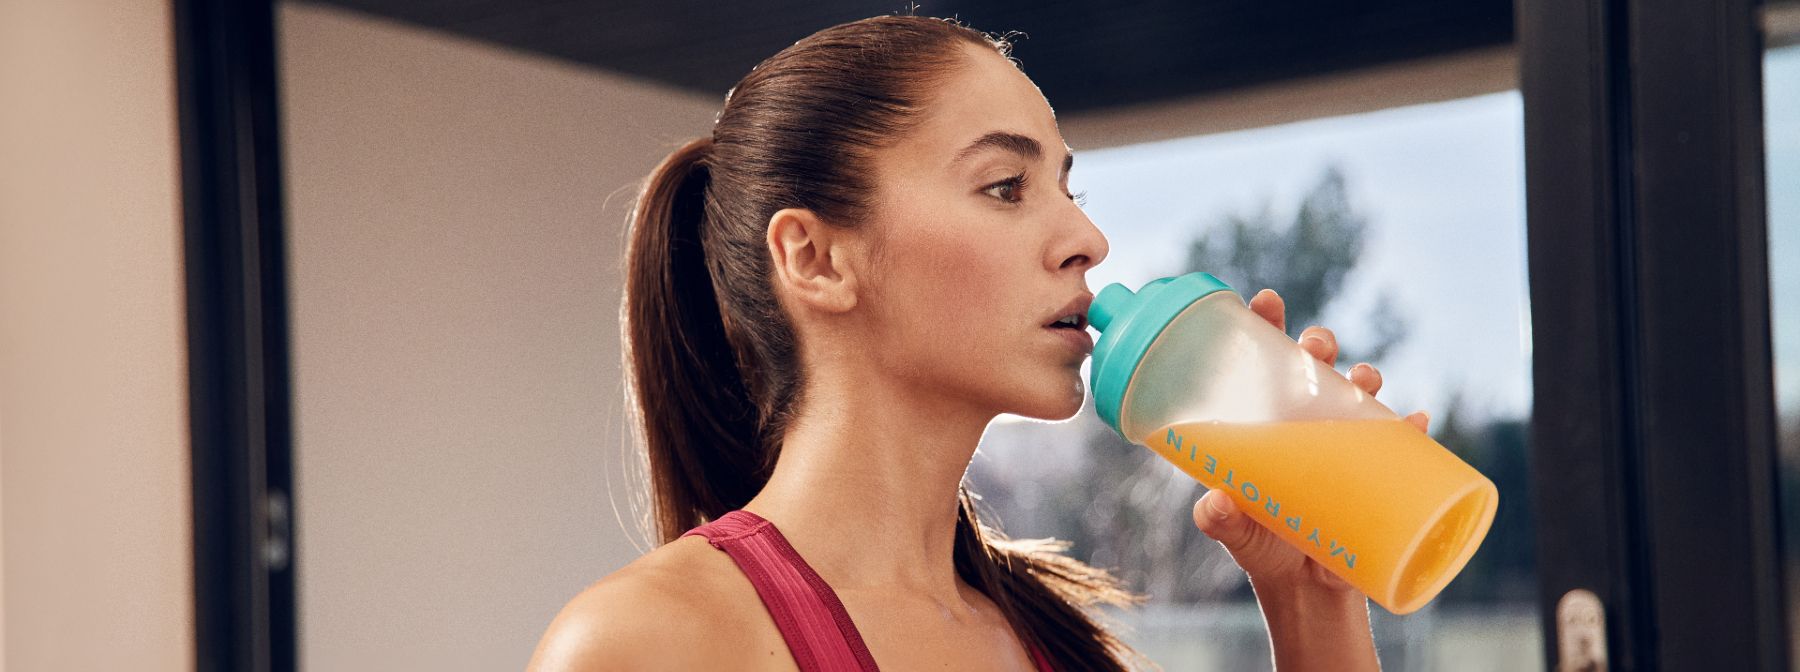 Hit Your Protein Macros While Staying Hydrated